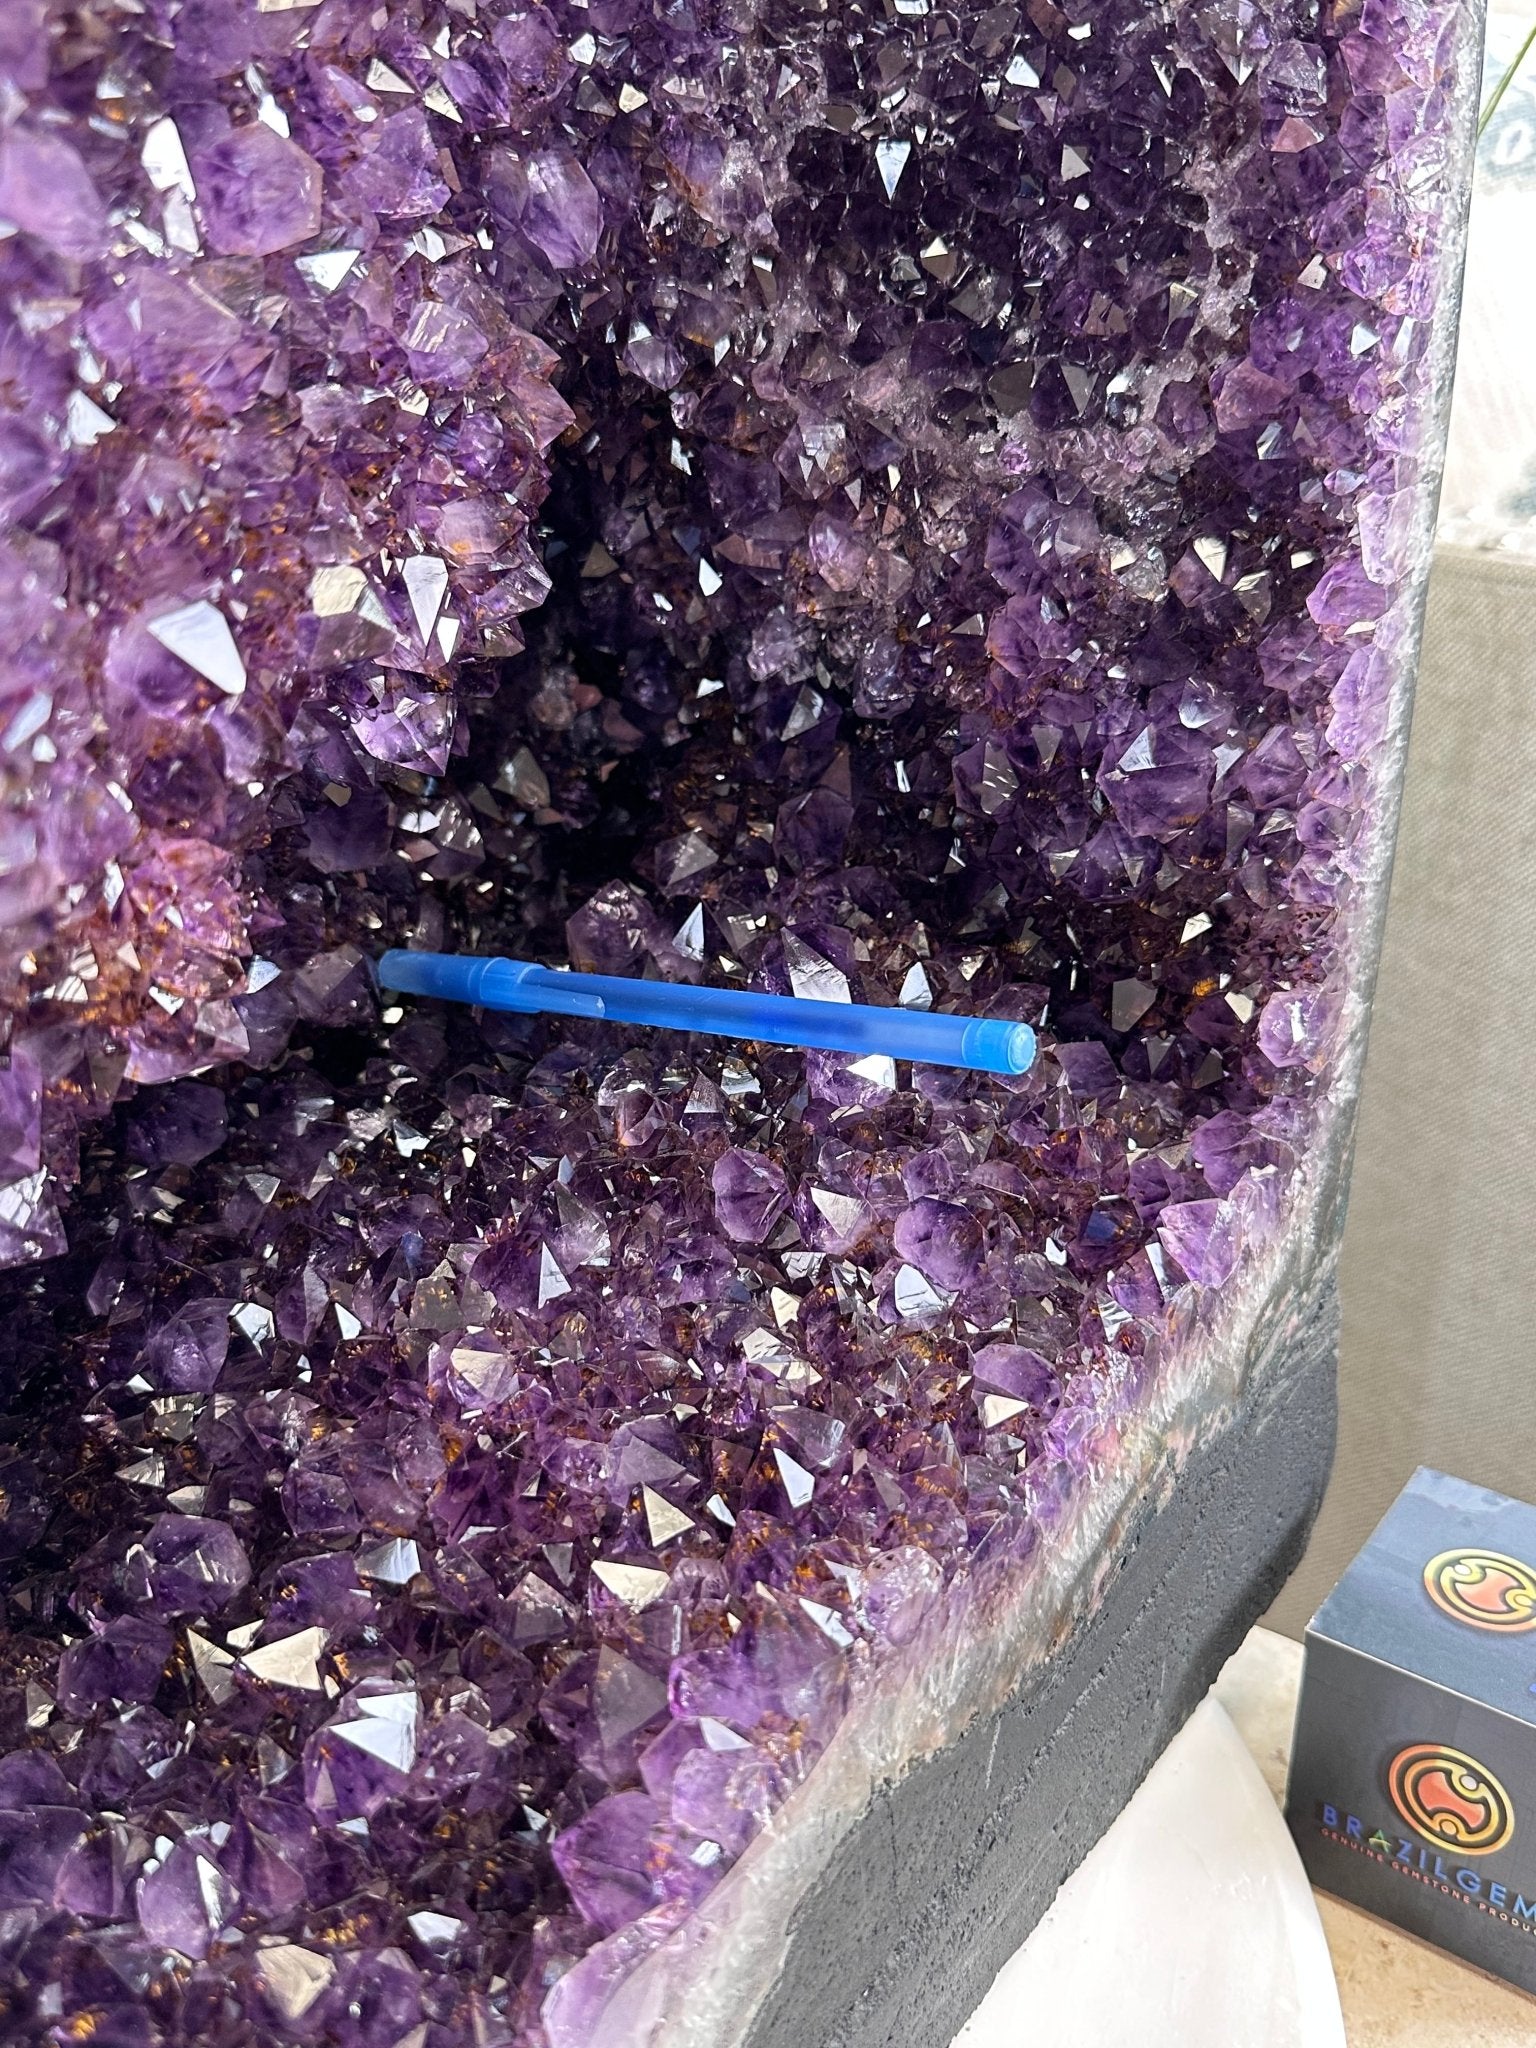 Super Quality Brazilian Amethyst Cathedral, 116.8 lbs & 27" Tall, Model #5601-1301 by Brazil Gems - Brazil GemsBrazil GemsSuper Quality Brazilian Amethyst Cathedral, 116.8 lbs & 27" Tall, Model #5601-1301 by Brazil GemsCathedrals5601-1301